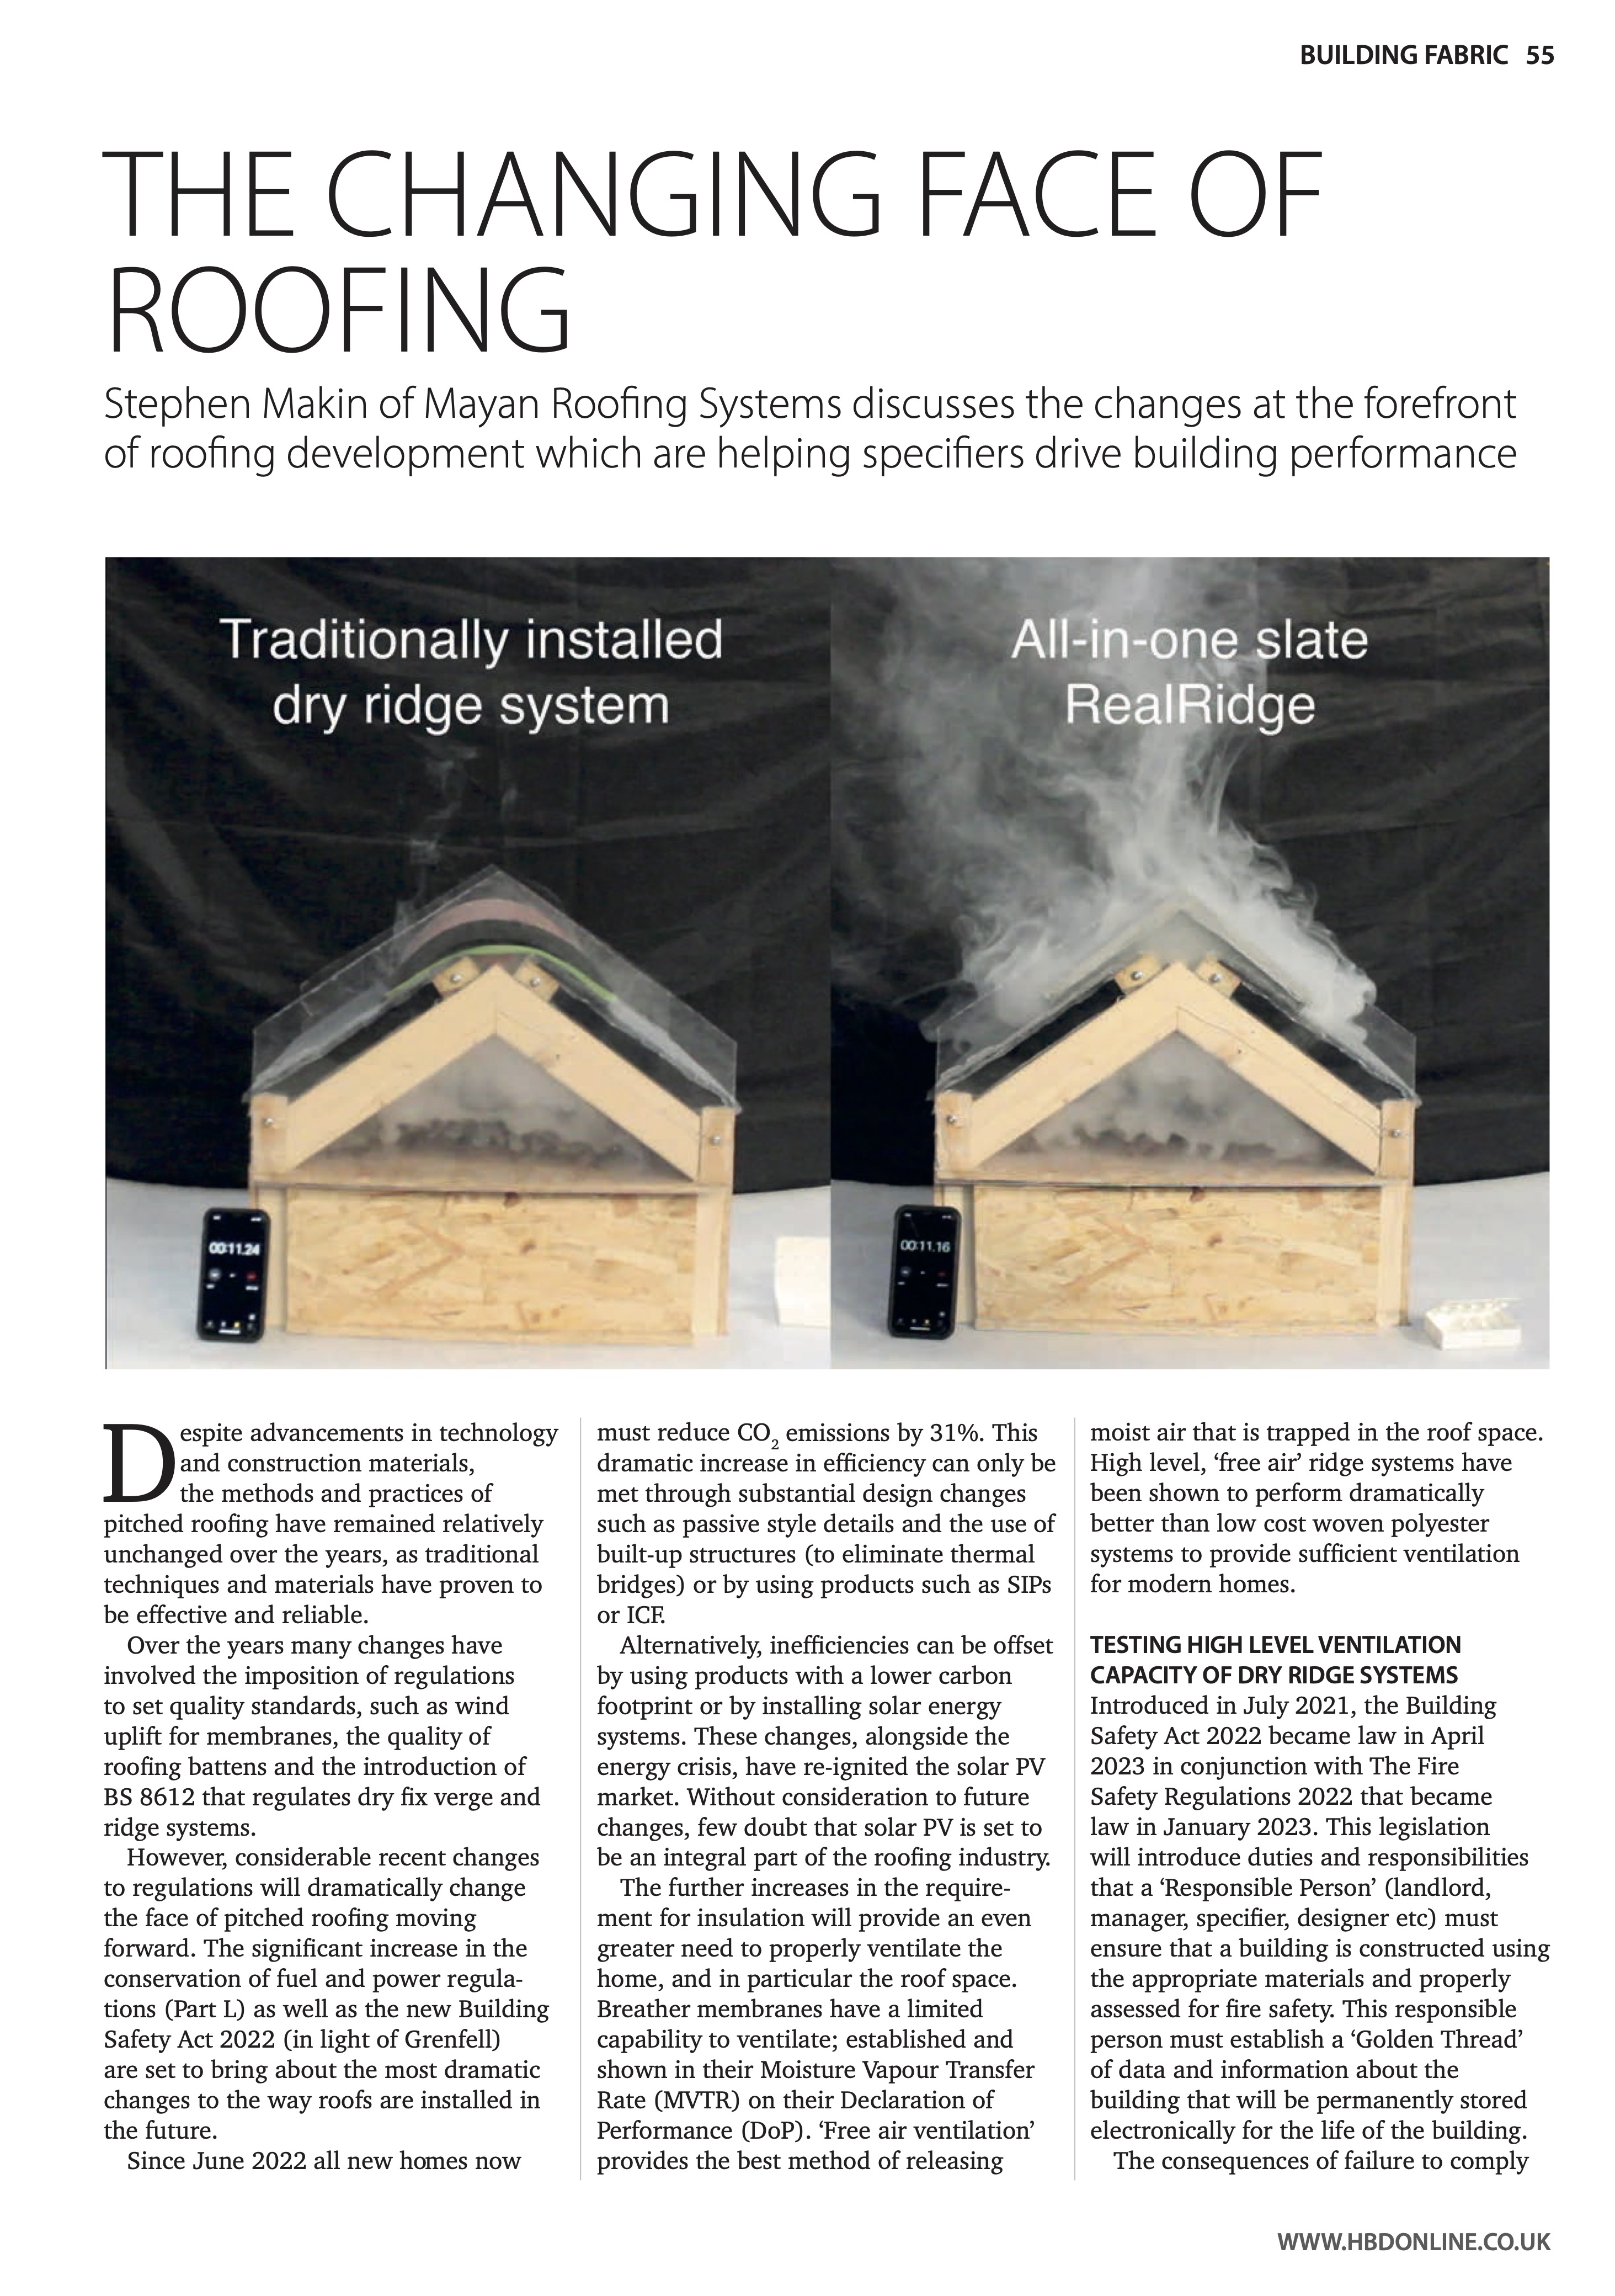 The Changing Face of Roofing